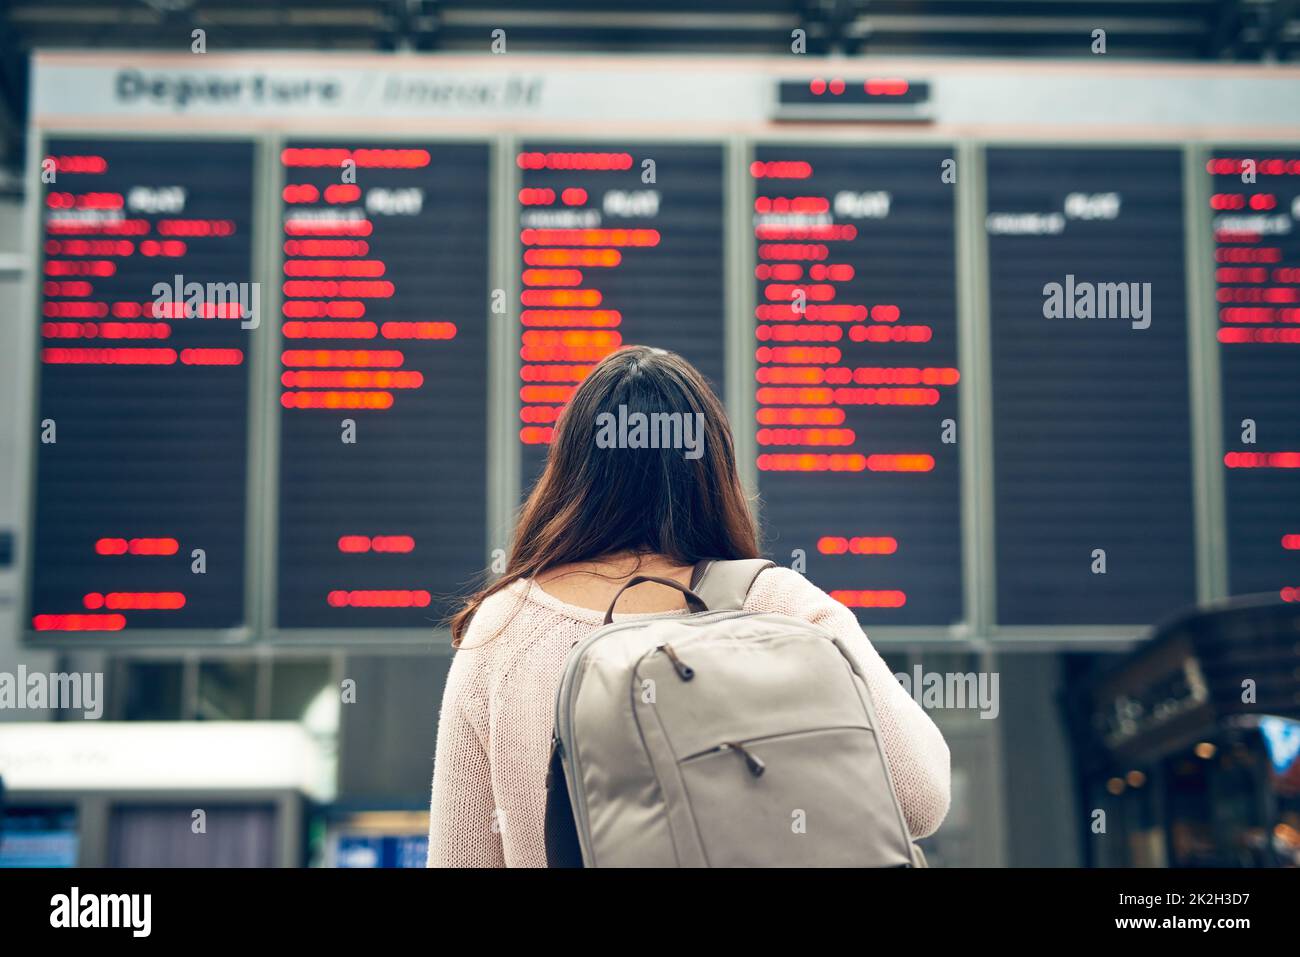 Let the journey begin. Rearview shot of an unrecognizable young woman looking at an arrivals and departures board while standing in an airport. Stock Photo